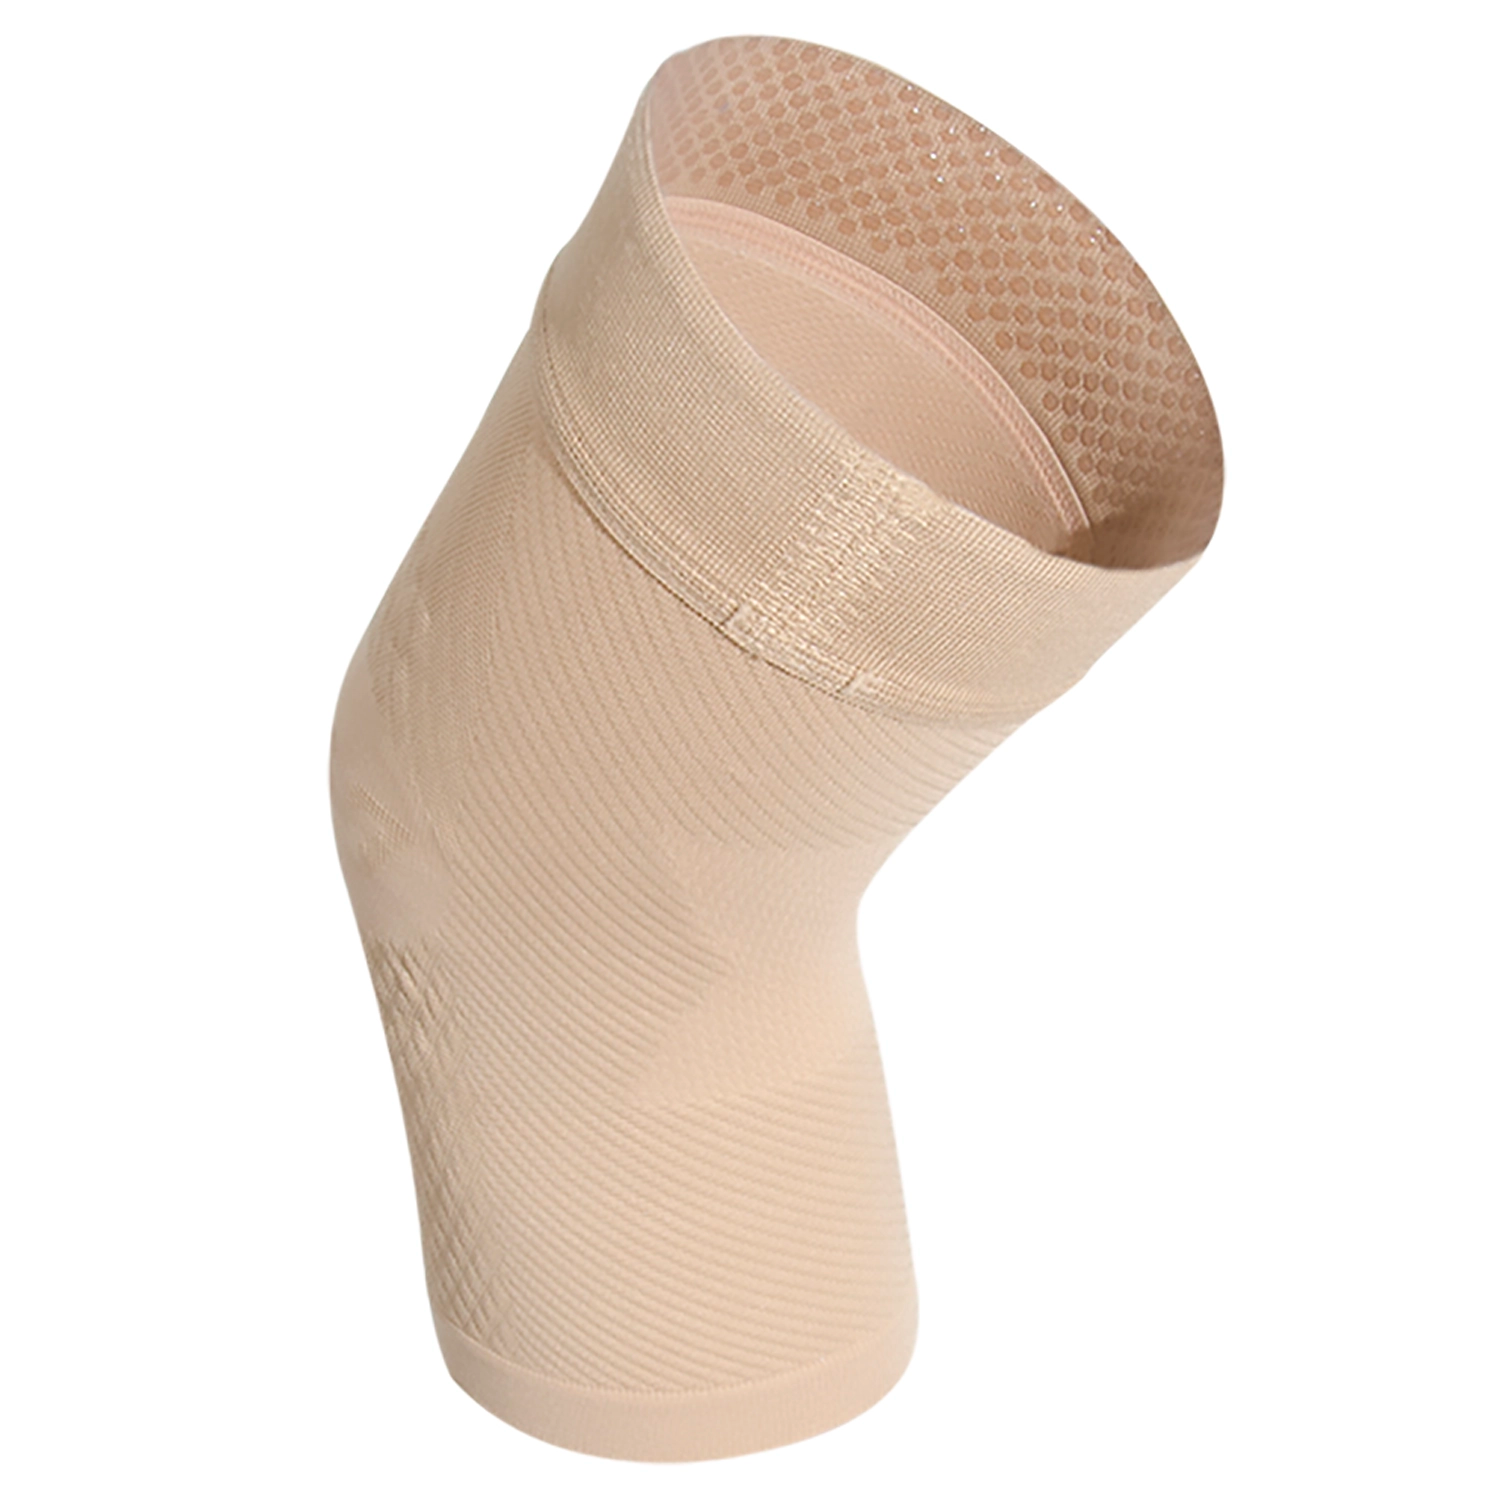 KS7 Performance Knee Sleeve in natural | OS1st